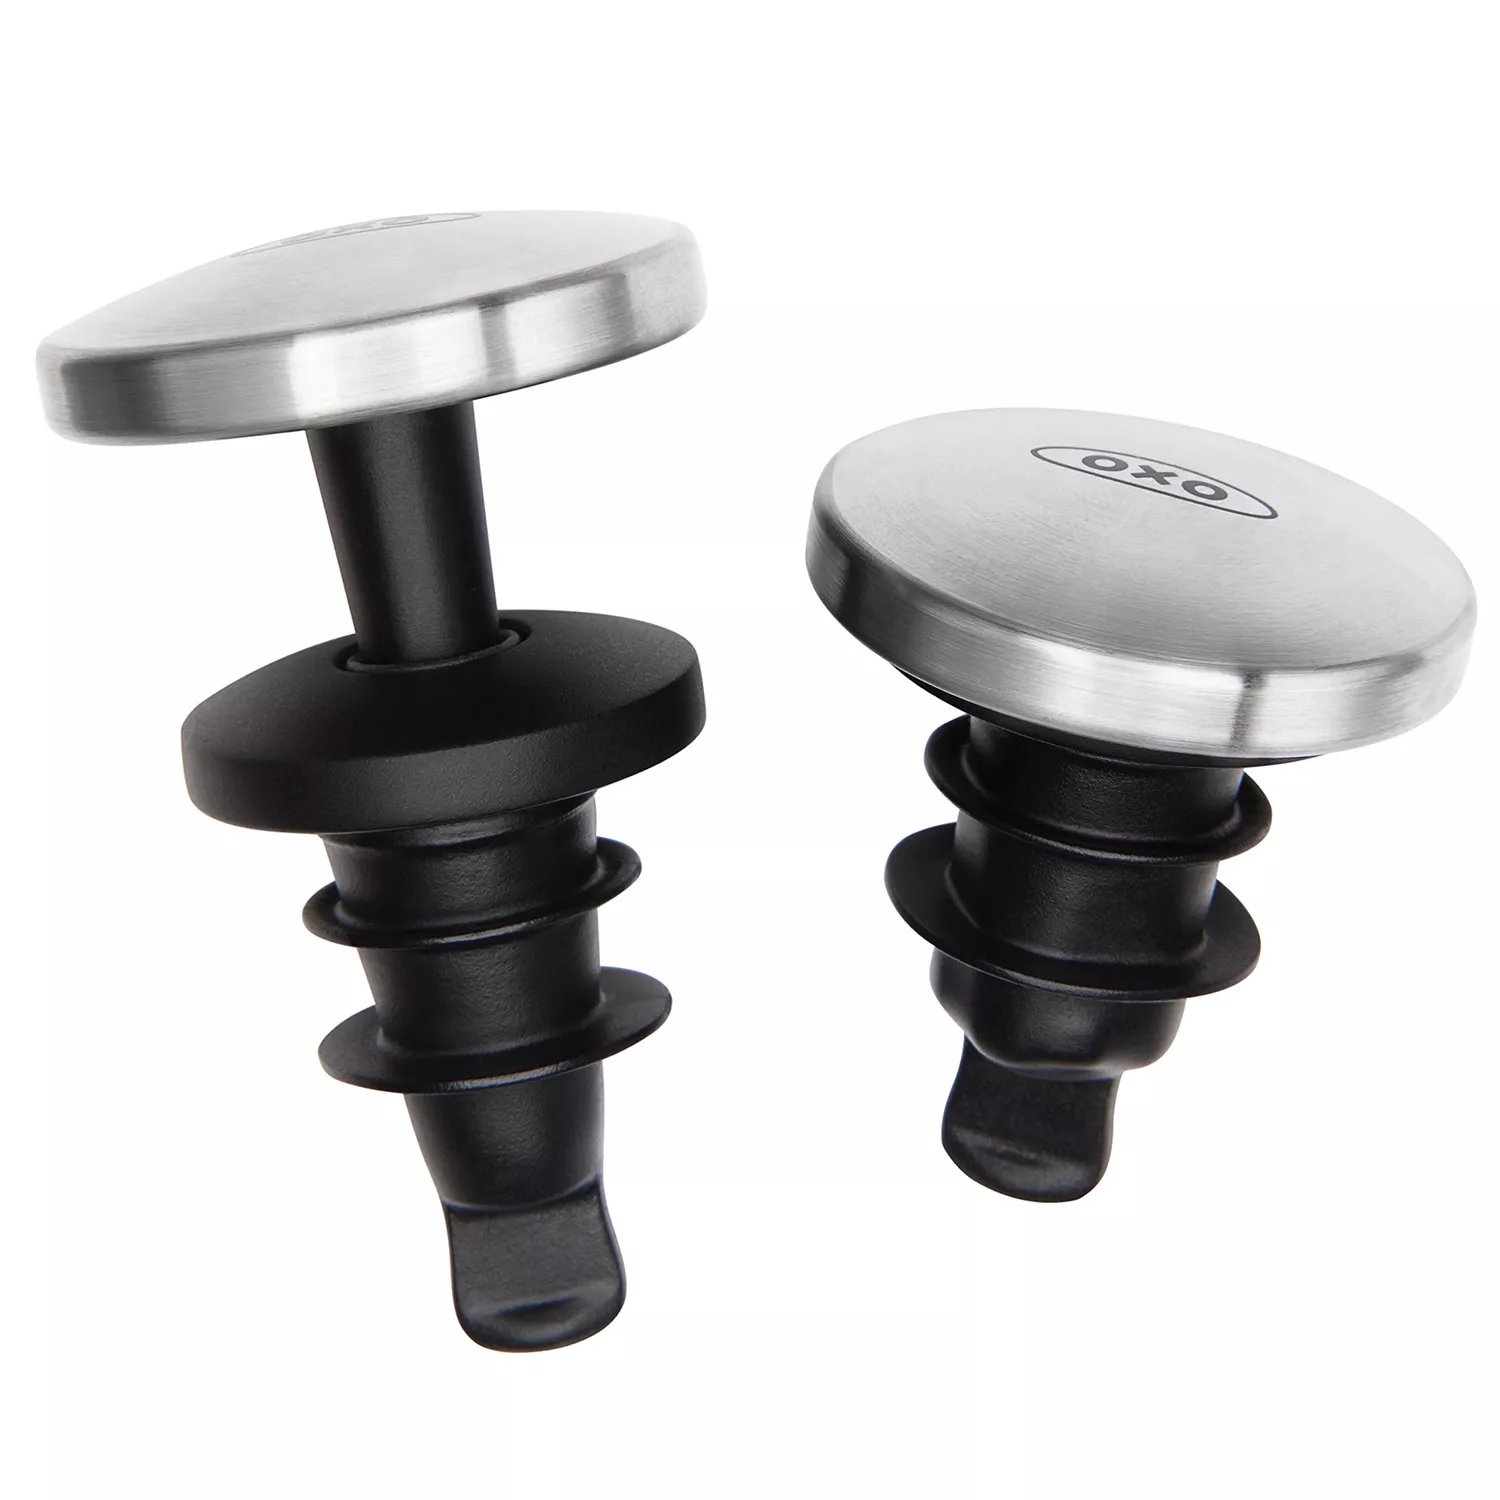 OXO Good Grips Silver/Black Silicone/Stainless Steel Oil Stopper